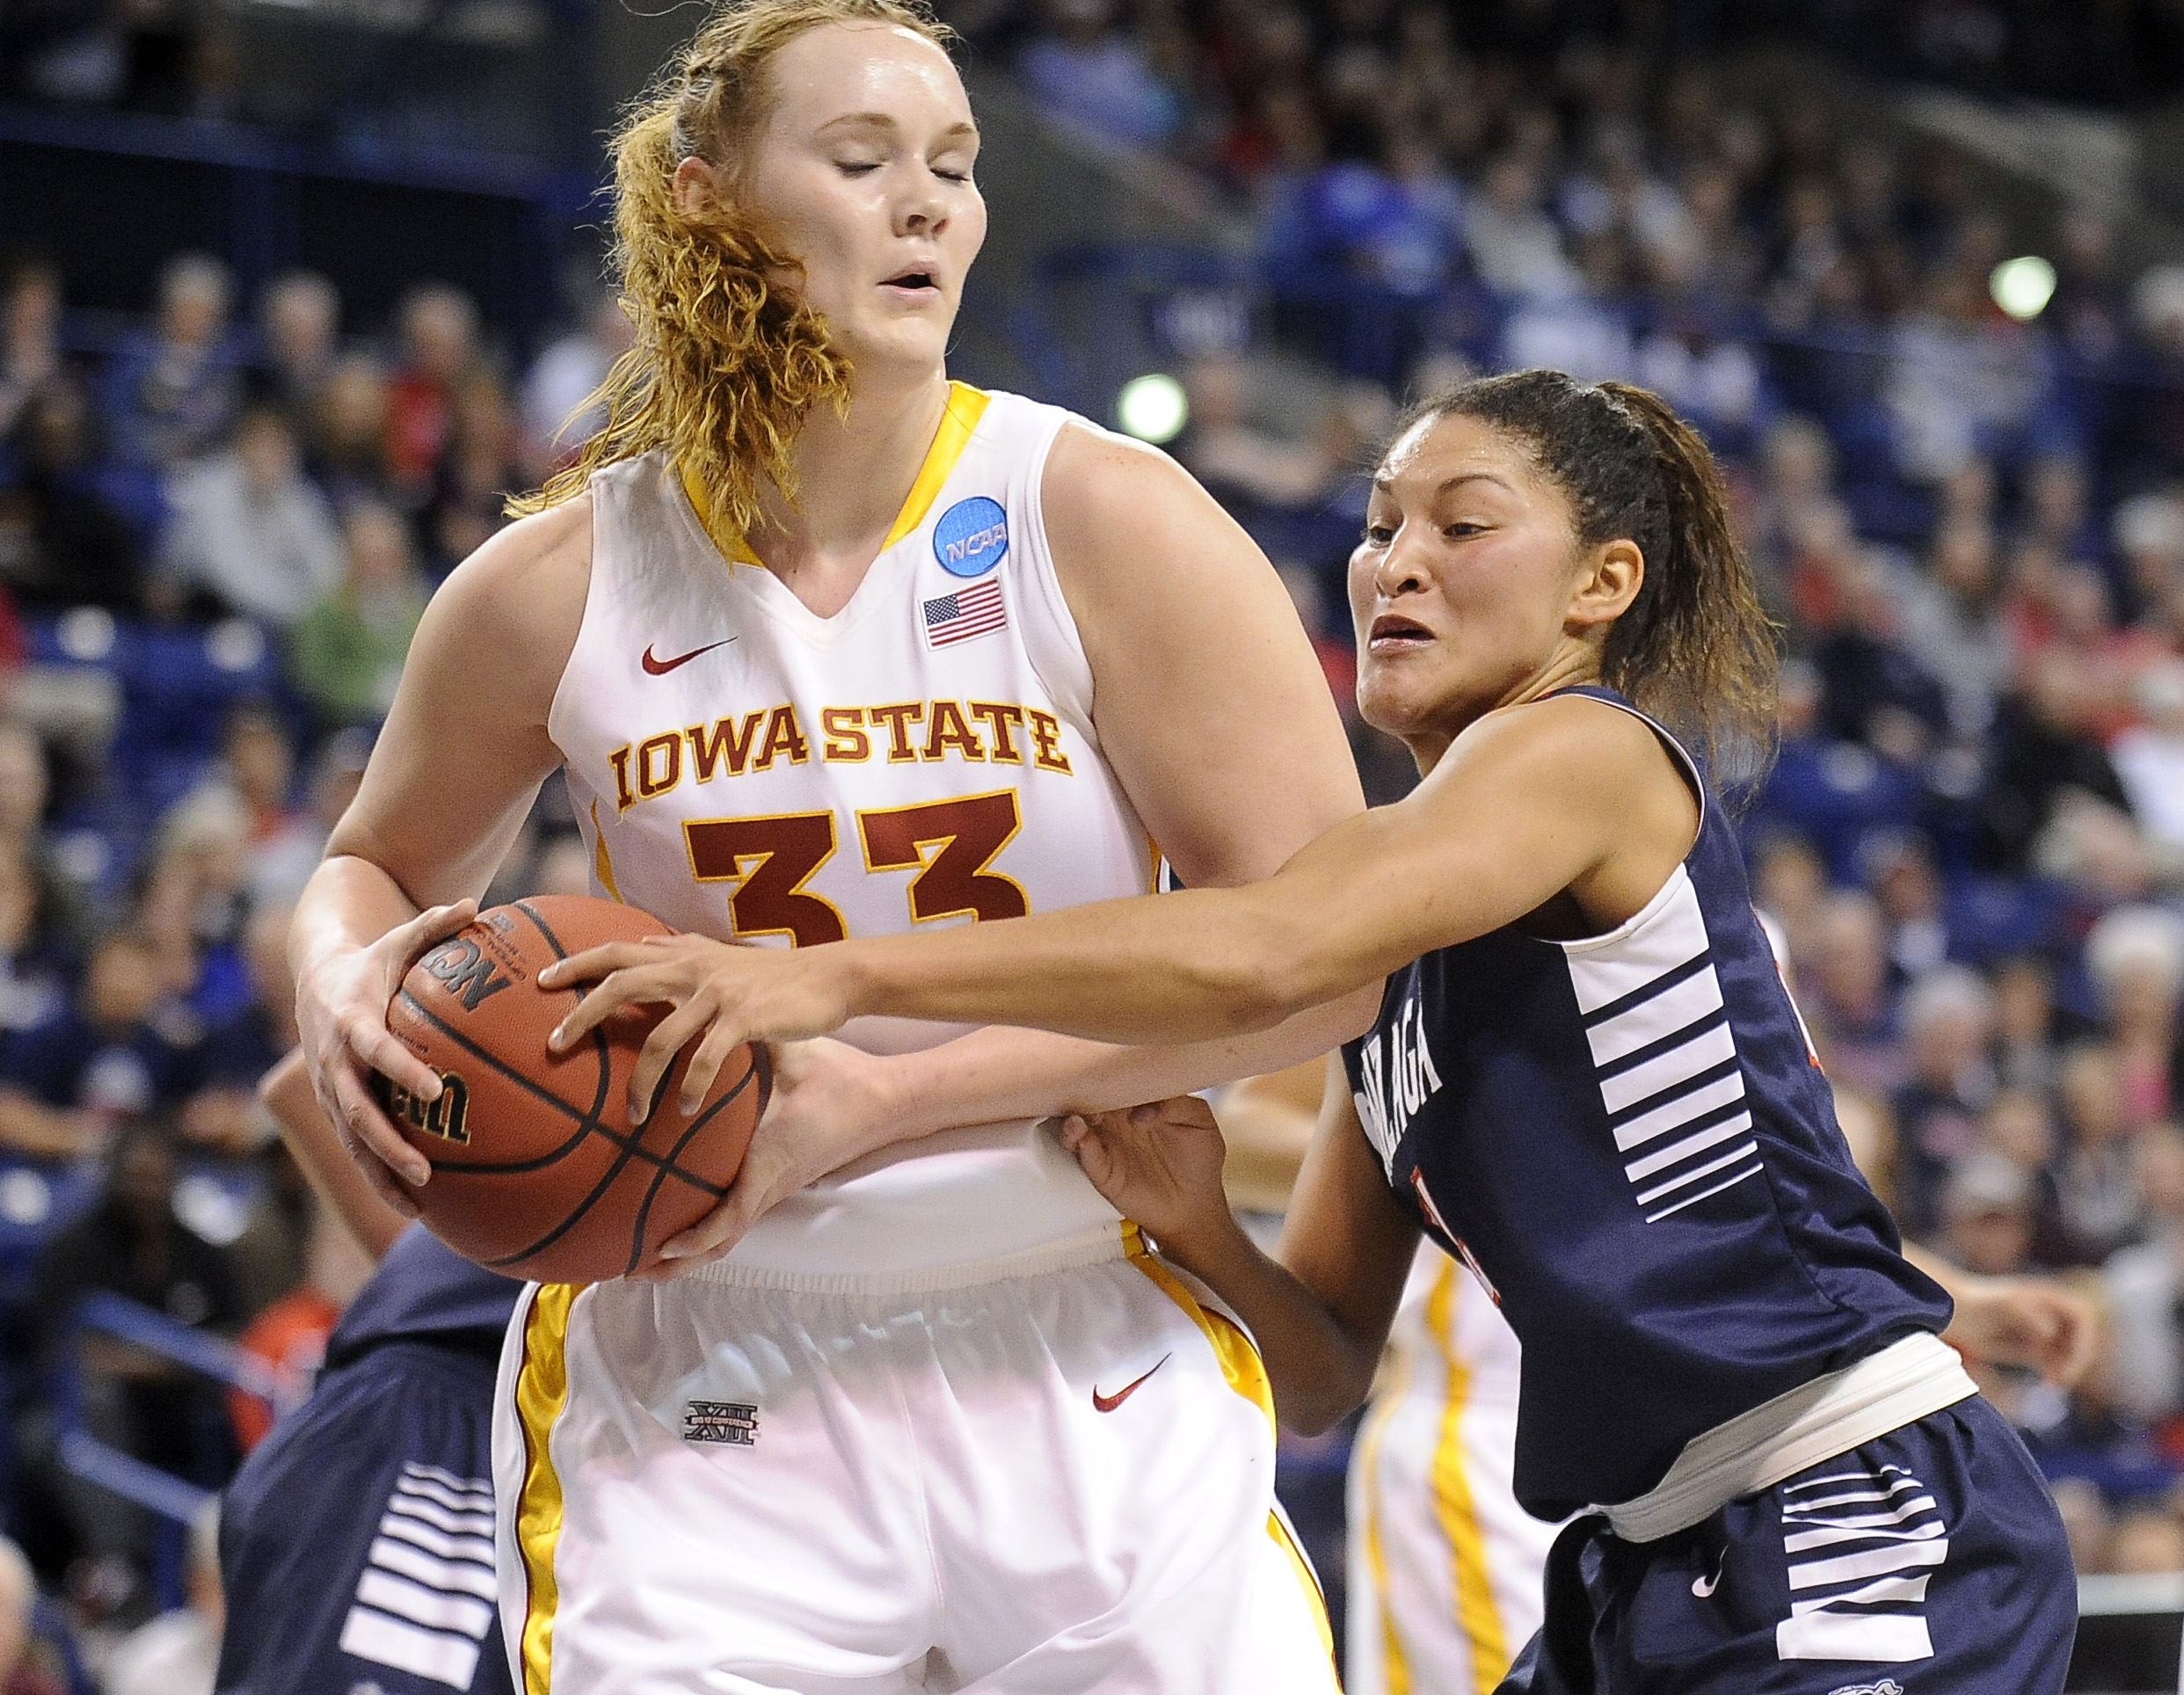 Iowa State women's basketball falls in first round of NCAA Tournament